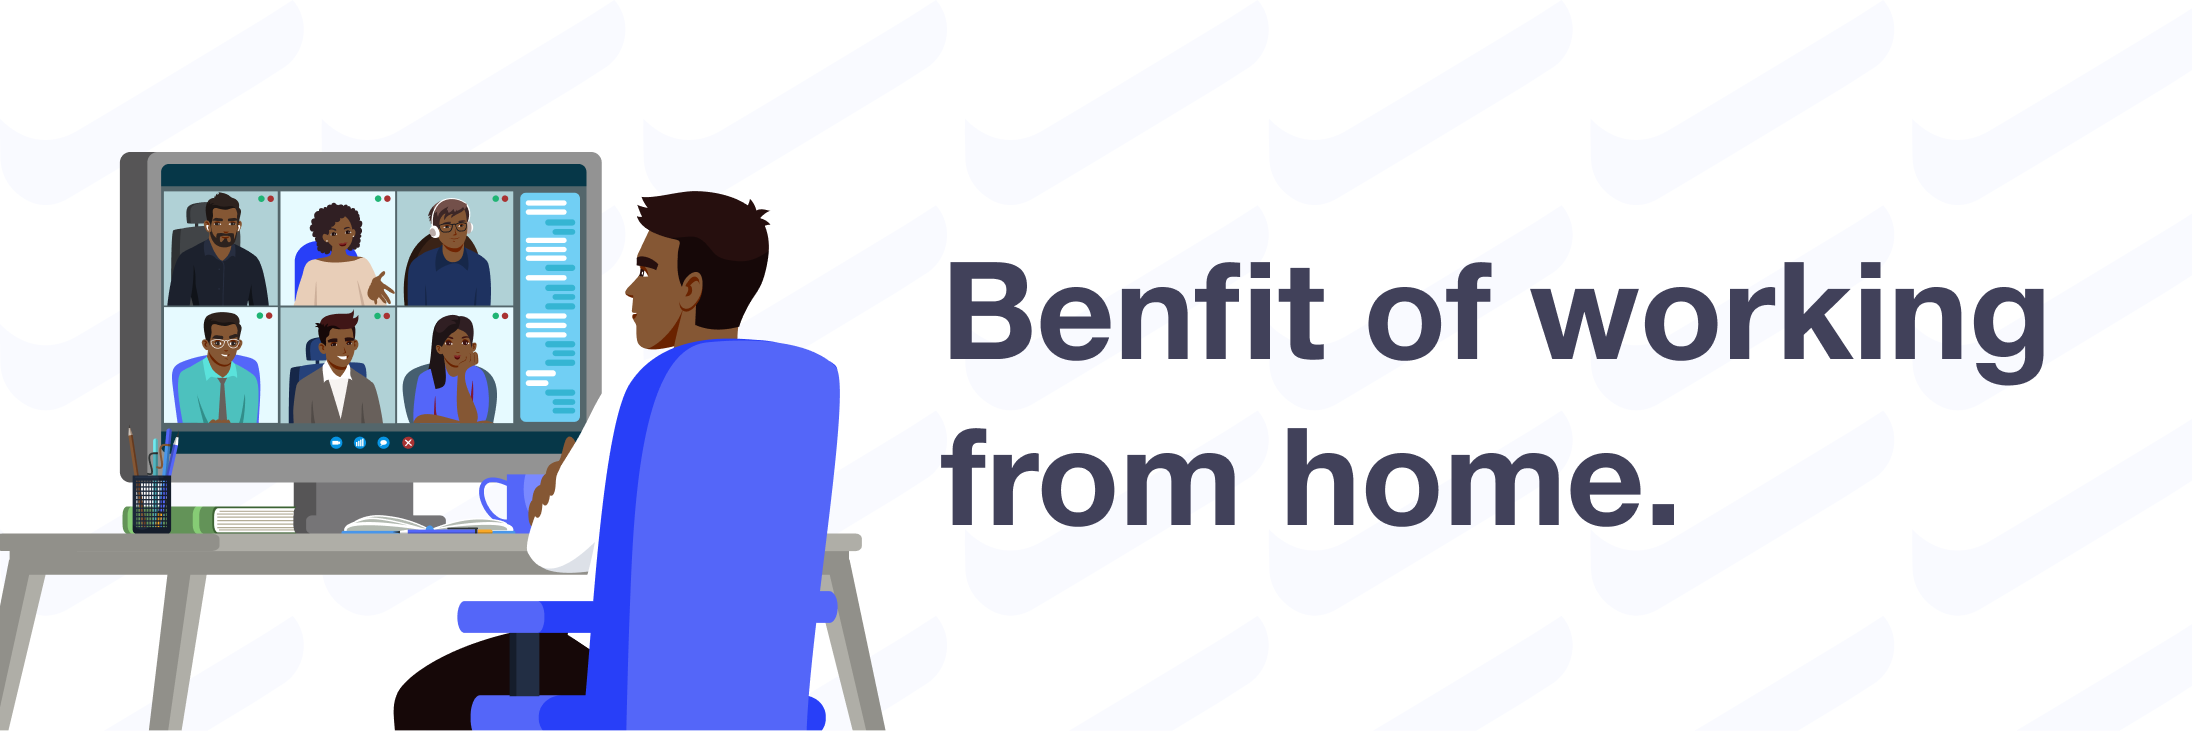 Great Benefits of Working from Home for Your Business and Employees